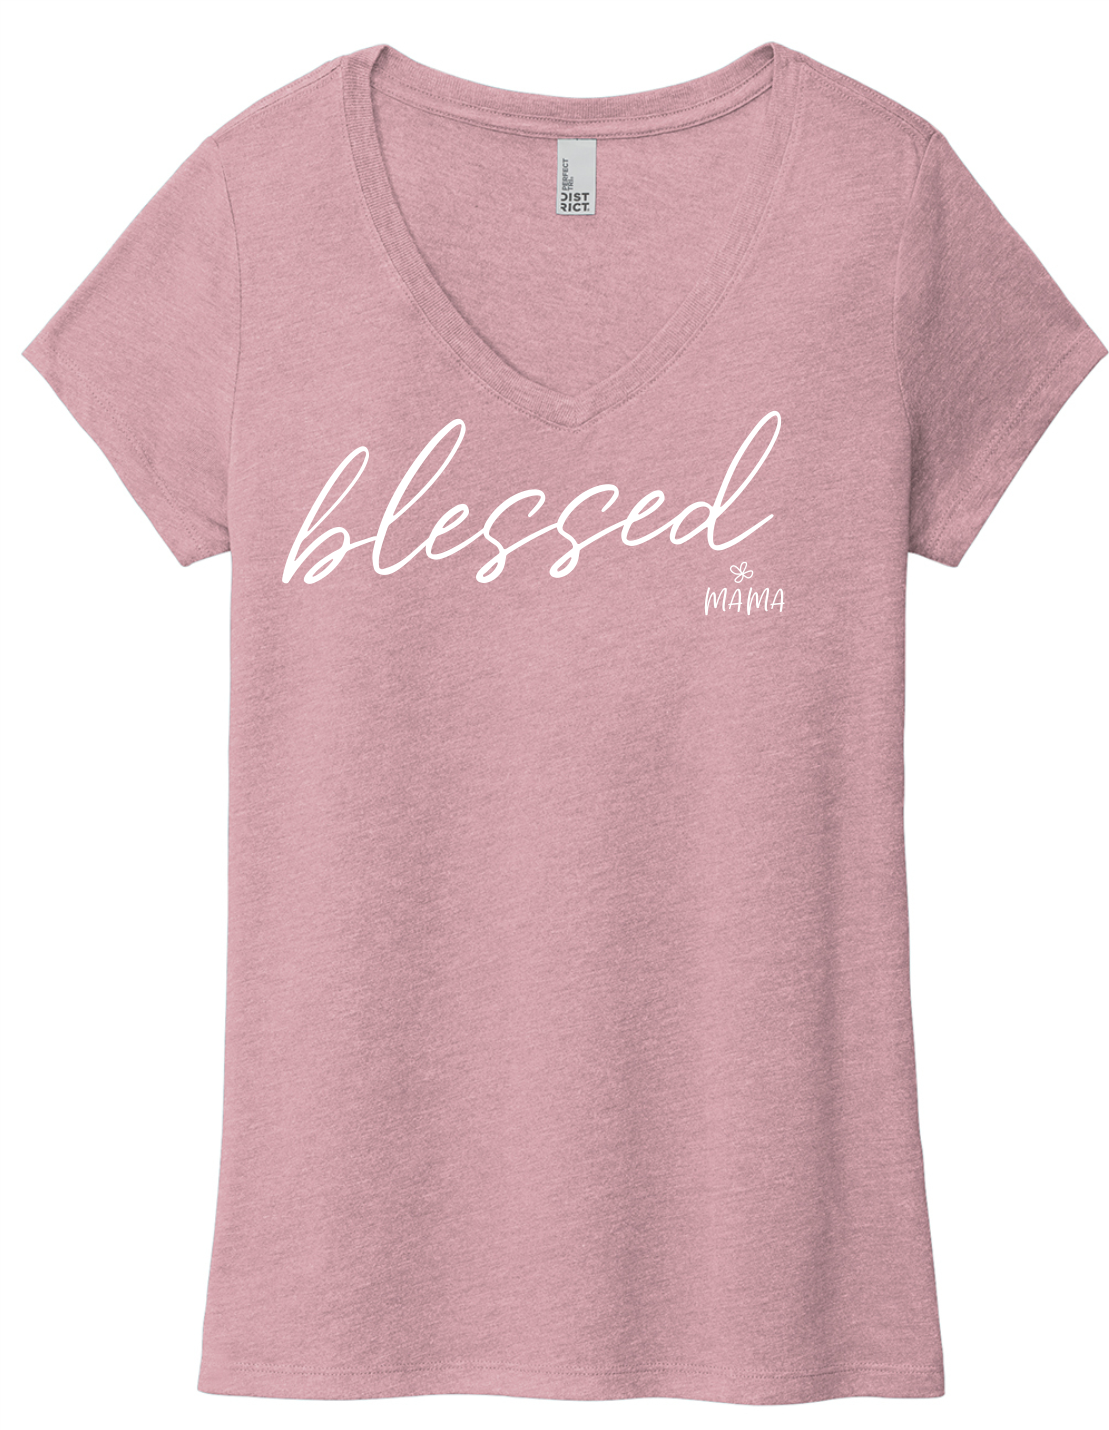 Script Blessed (soft t)